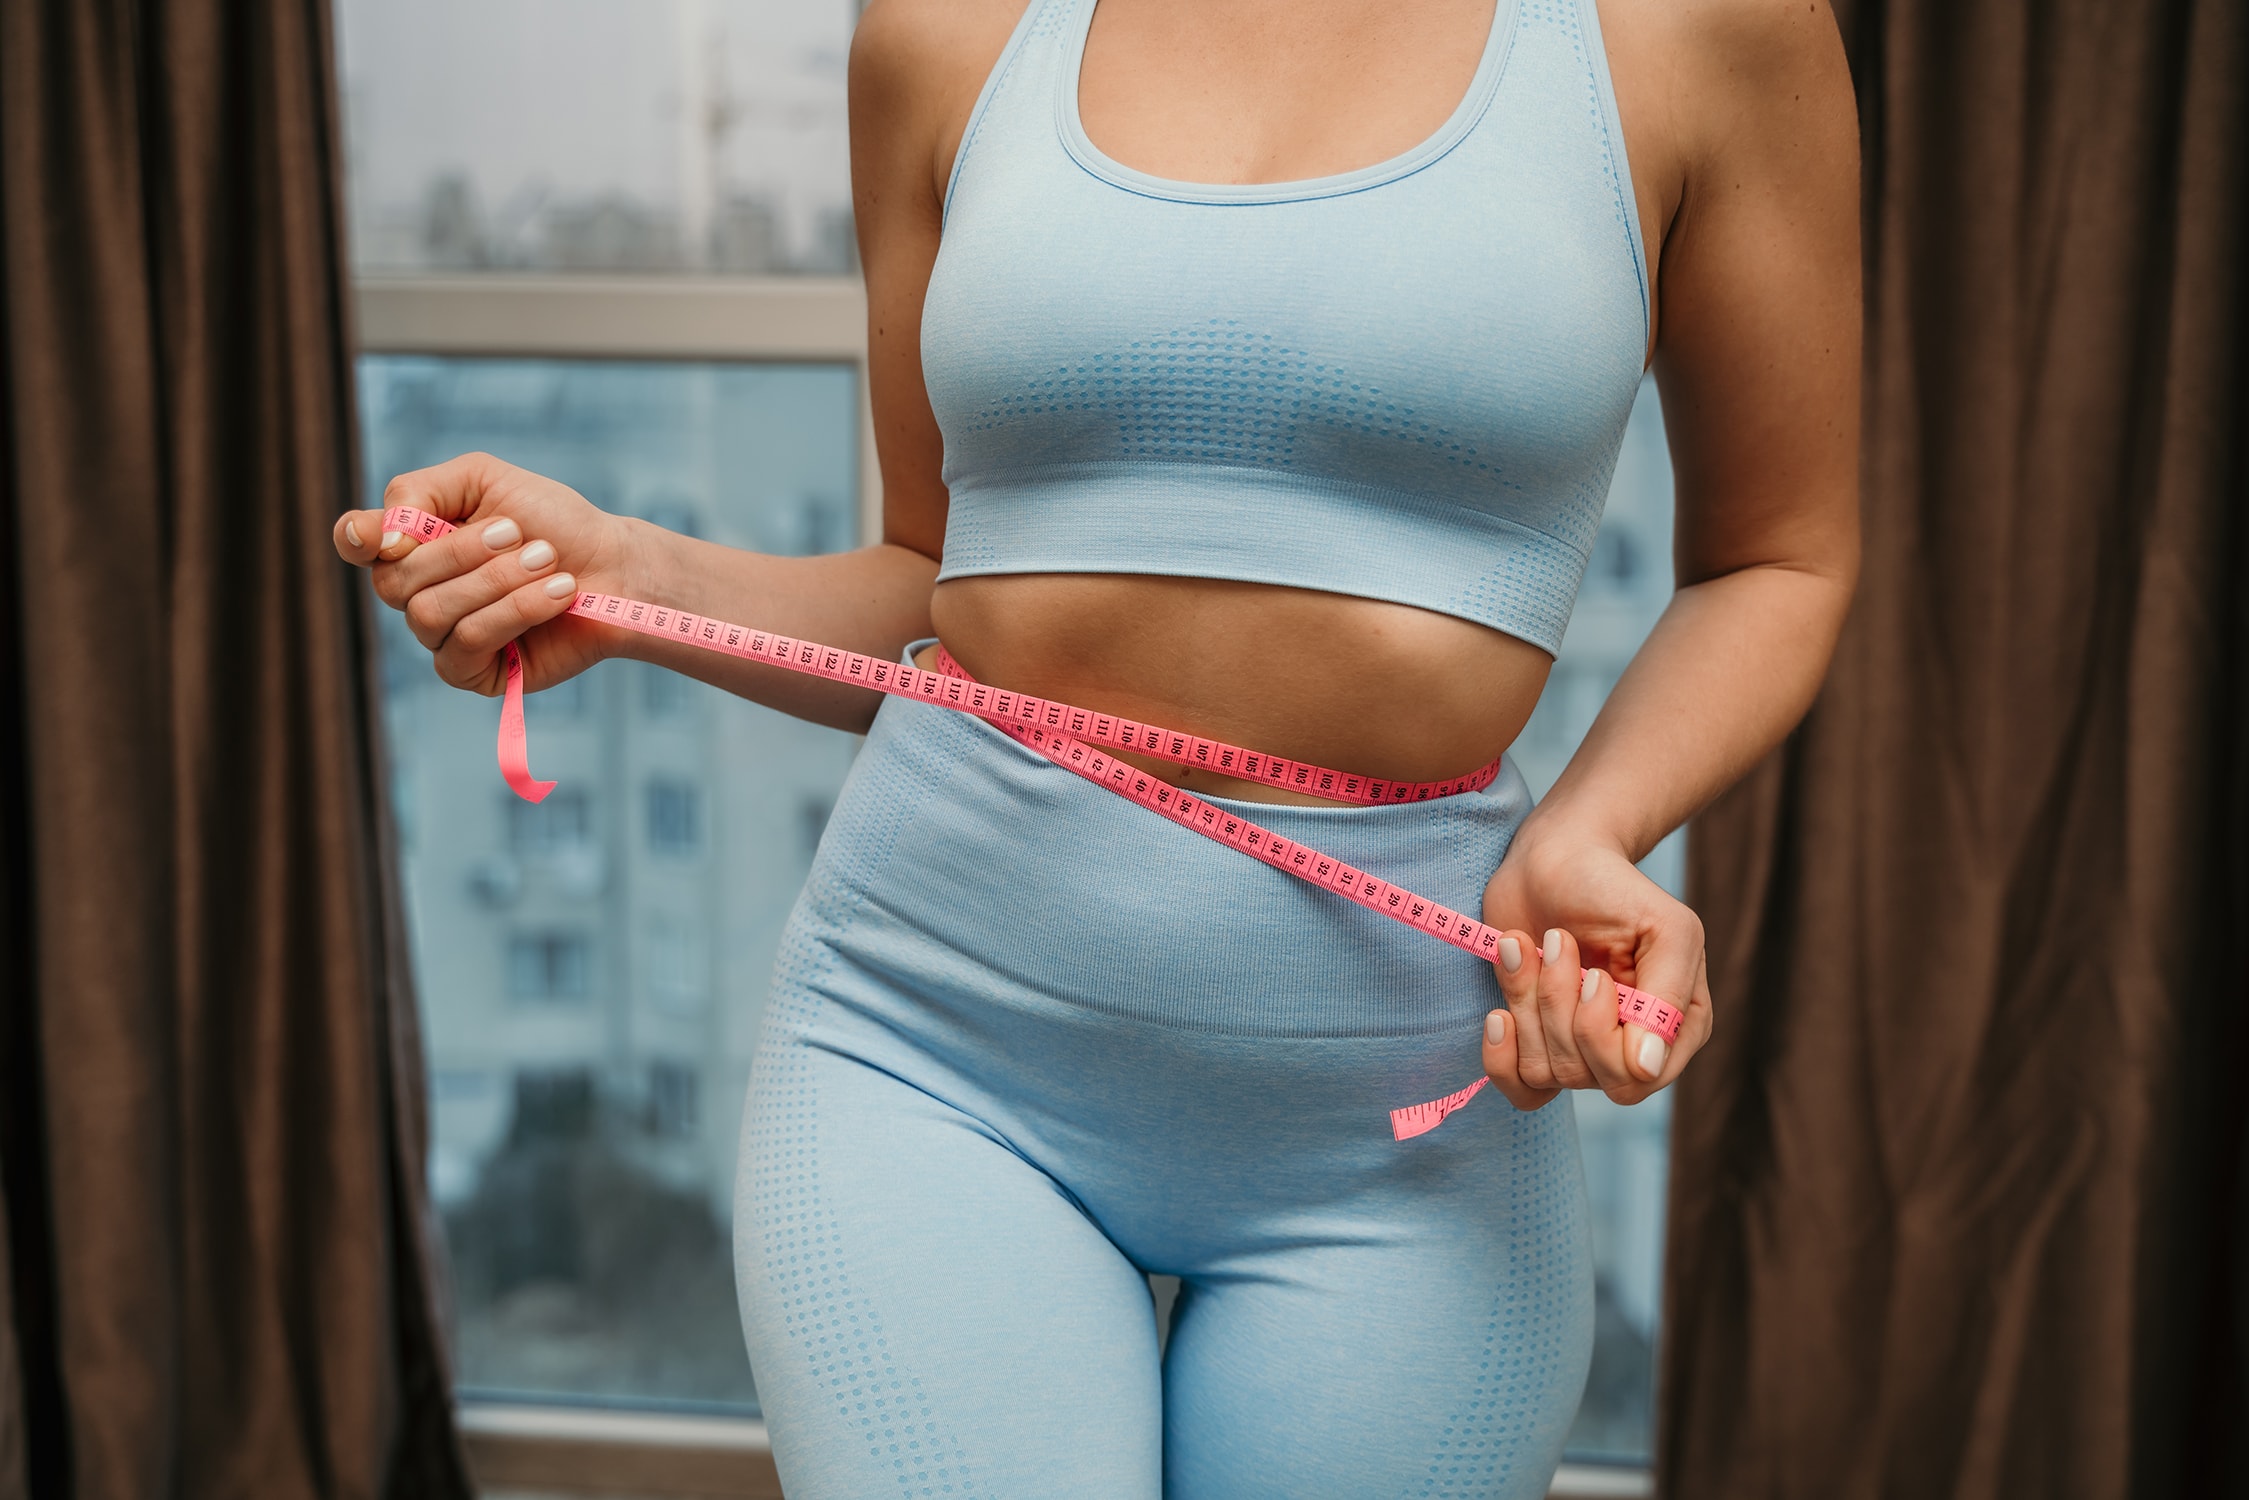 Cropped view of slim woman measuring waist with tape measure at home, close up. Unrecognizable european woman checking the result of diet for weight loss or liposuction indoors